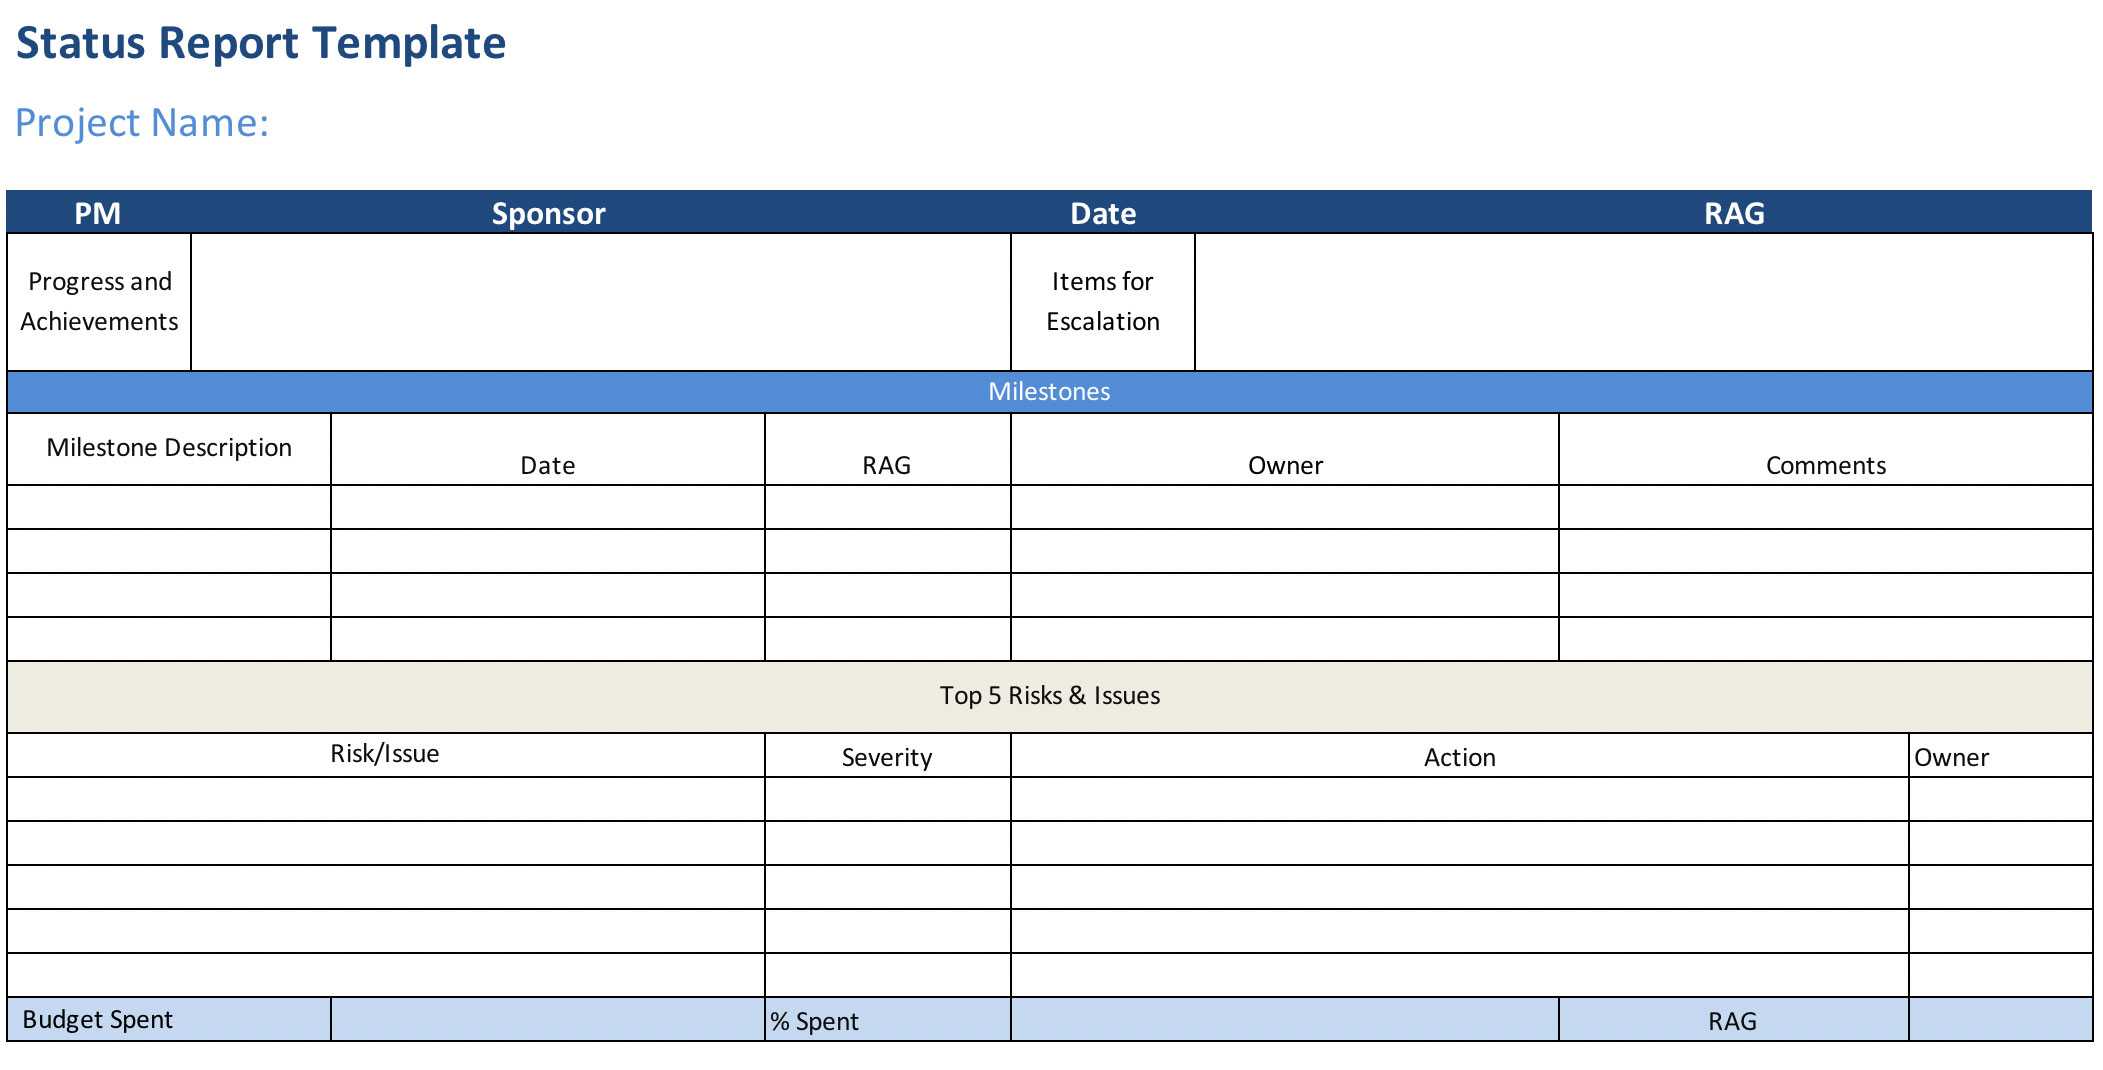 Project Status Report (Free Excel Template) – Projectmanager With Regard To Project Status Report Template In Excel